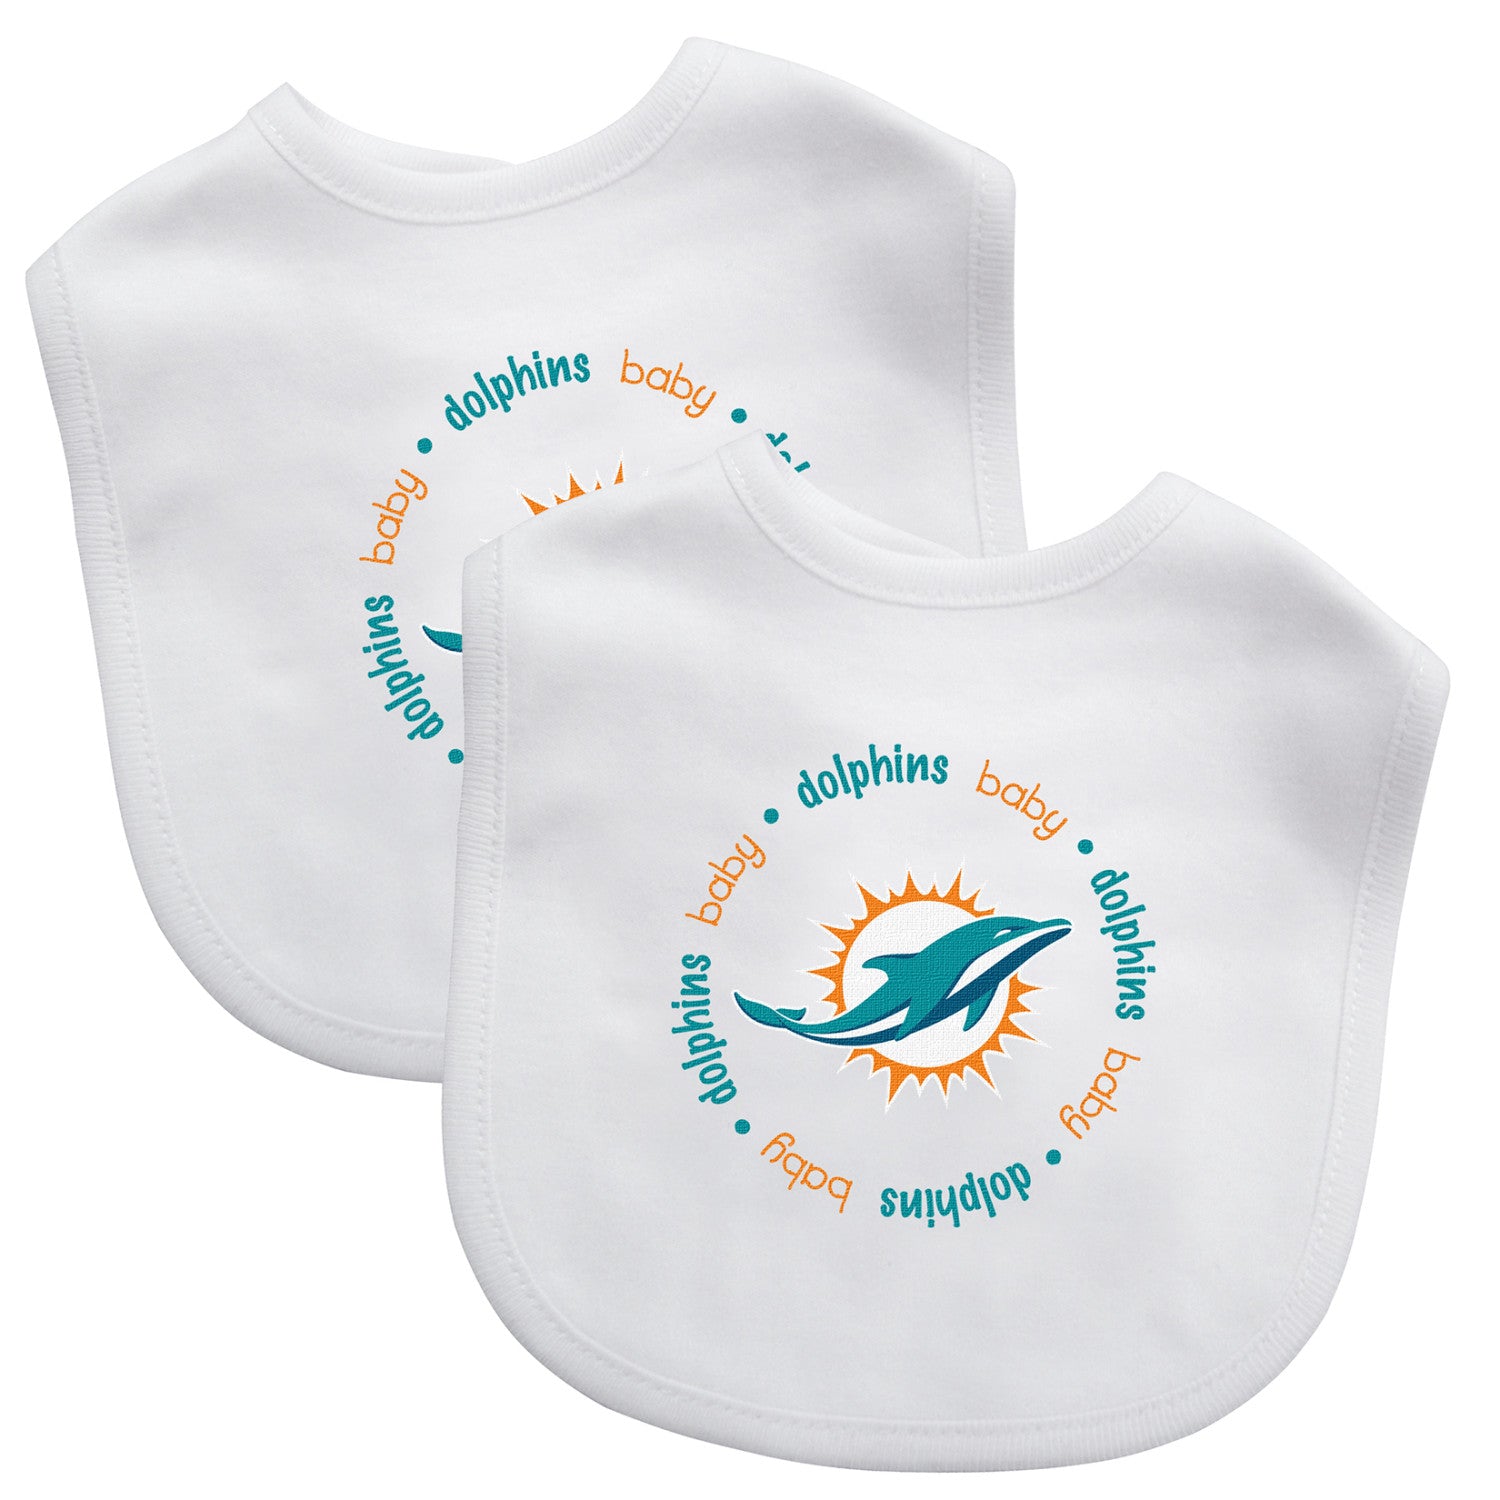 Miami Dolphins - Baby Bibs 2-Pack